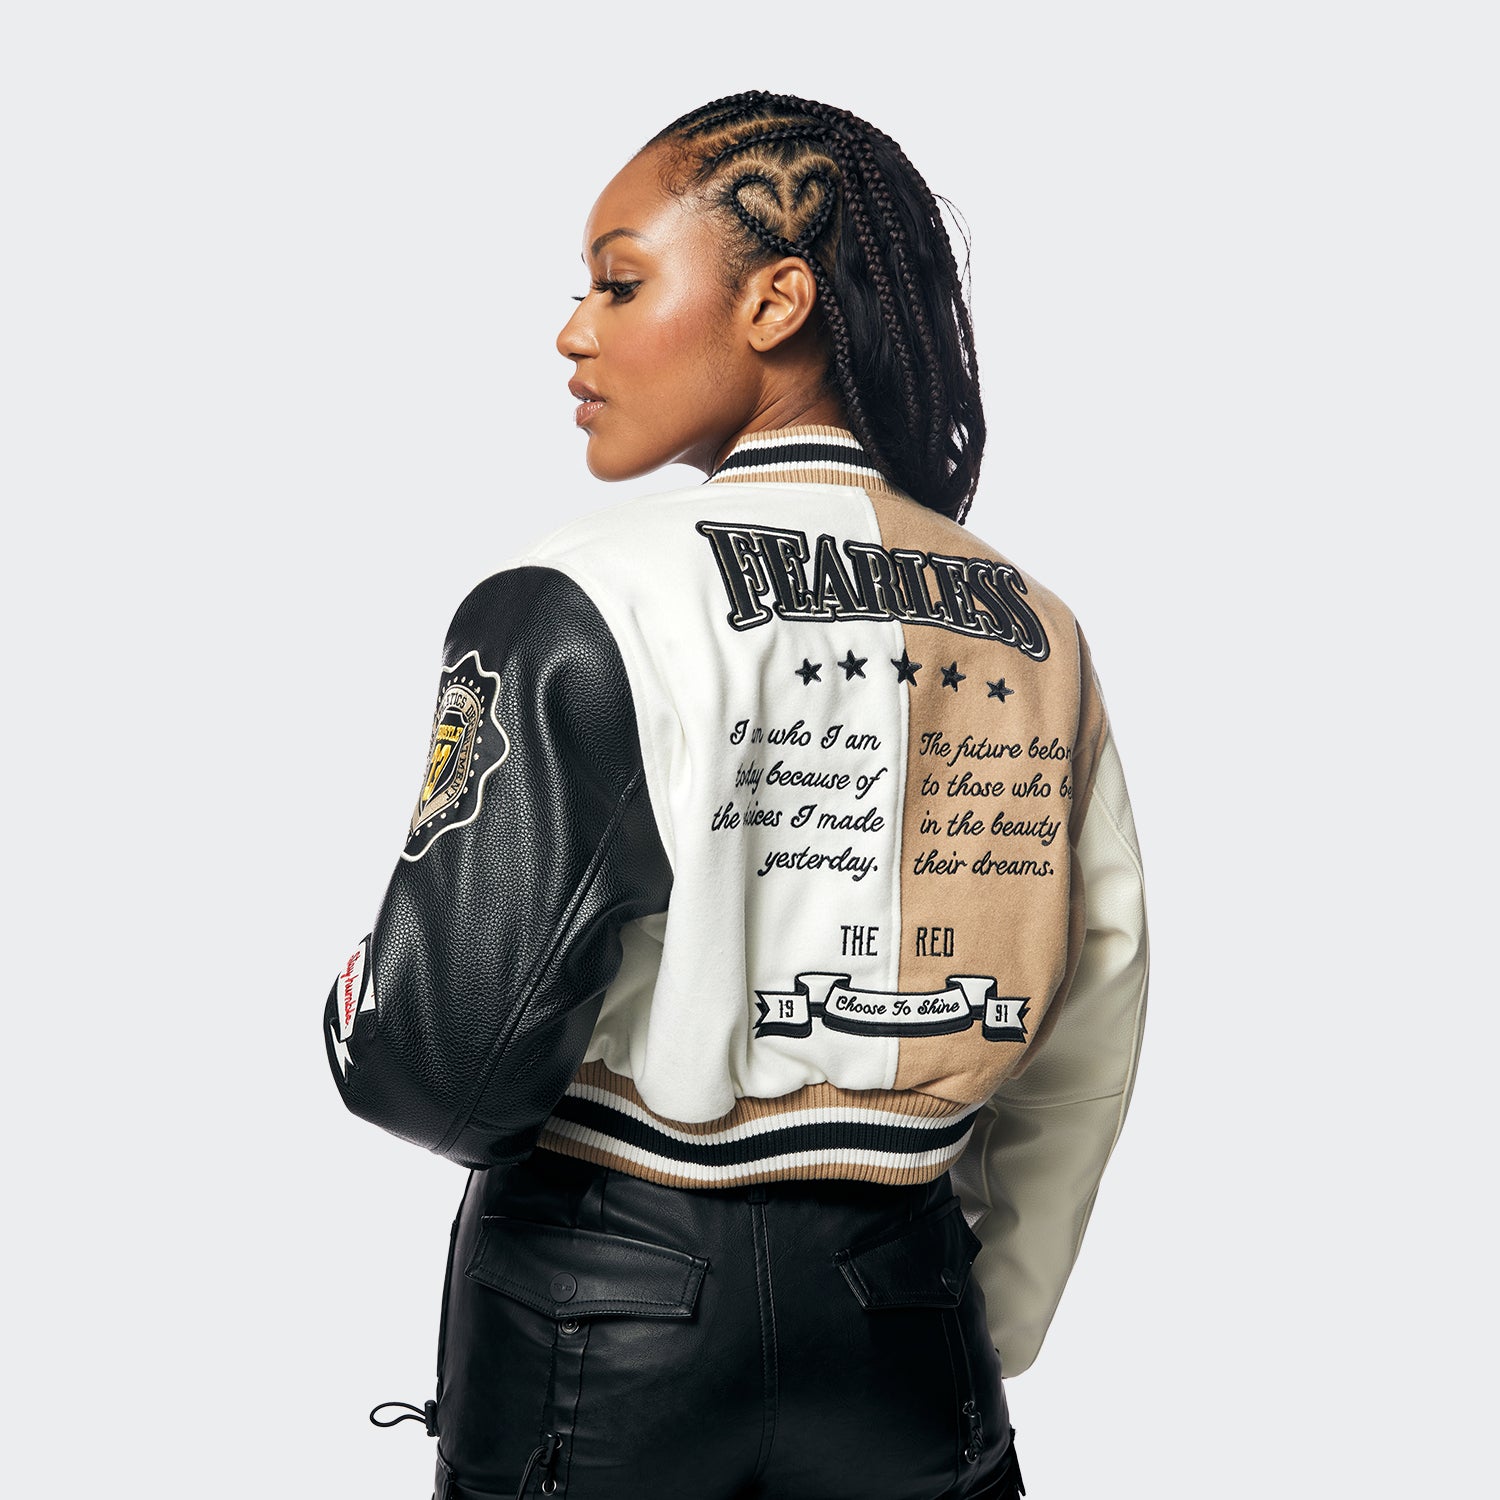 Women's Wool And Leather Varsity Jacket by Off-white